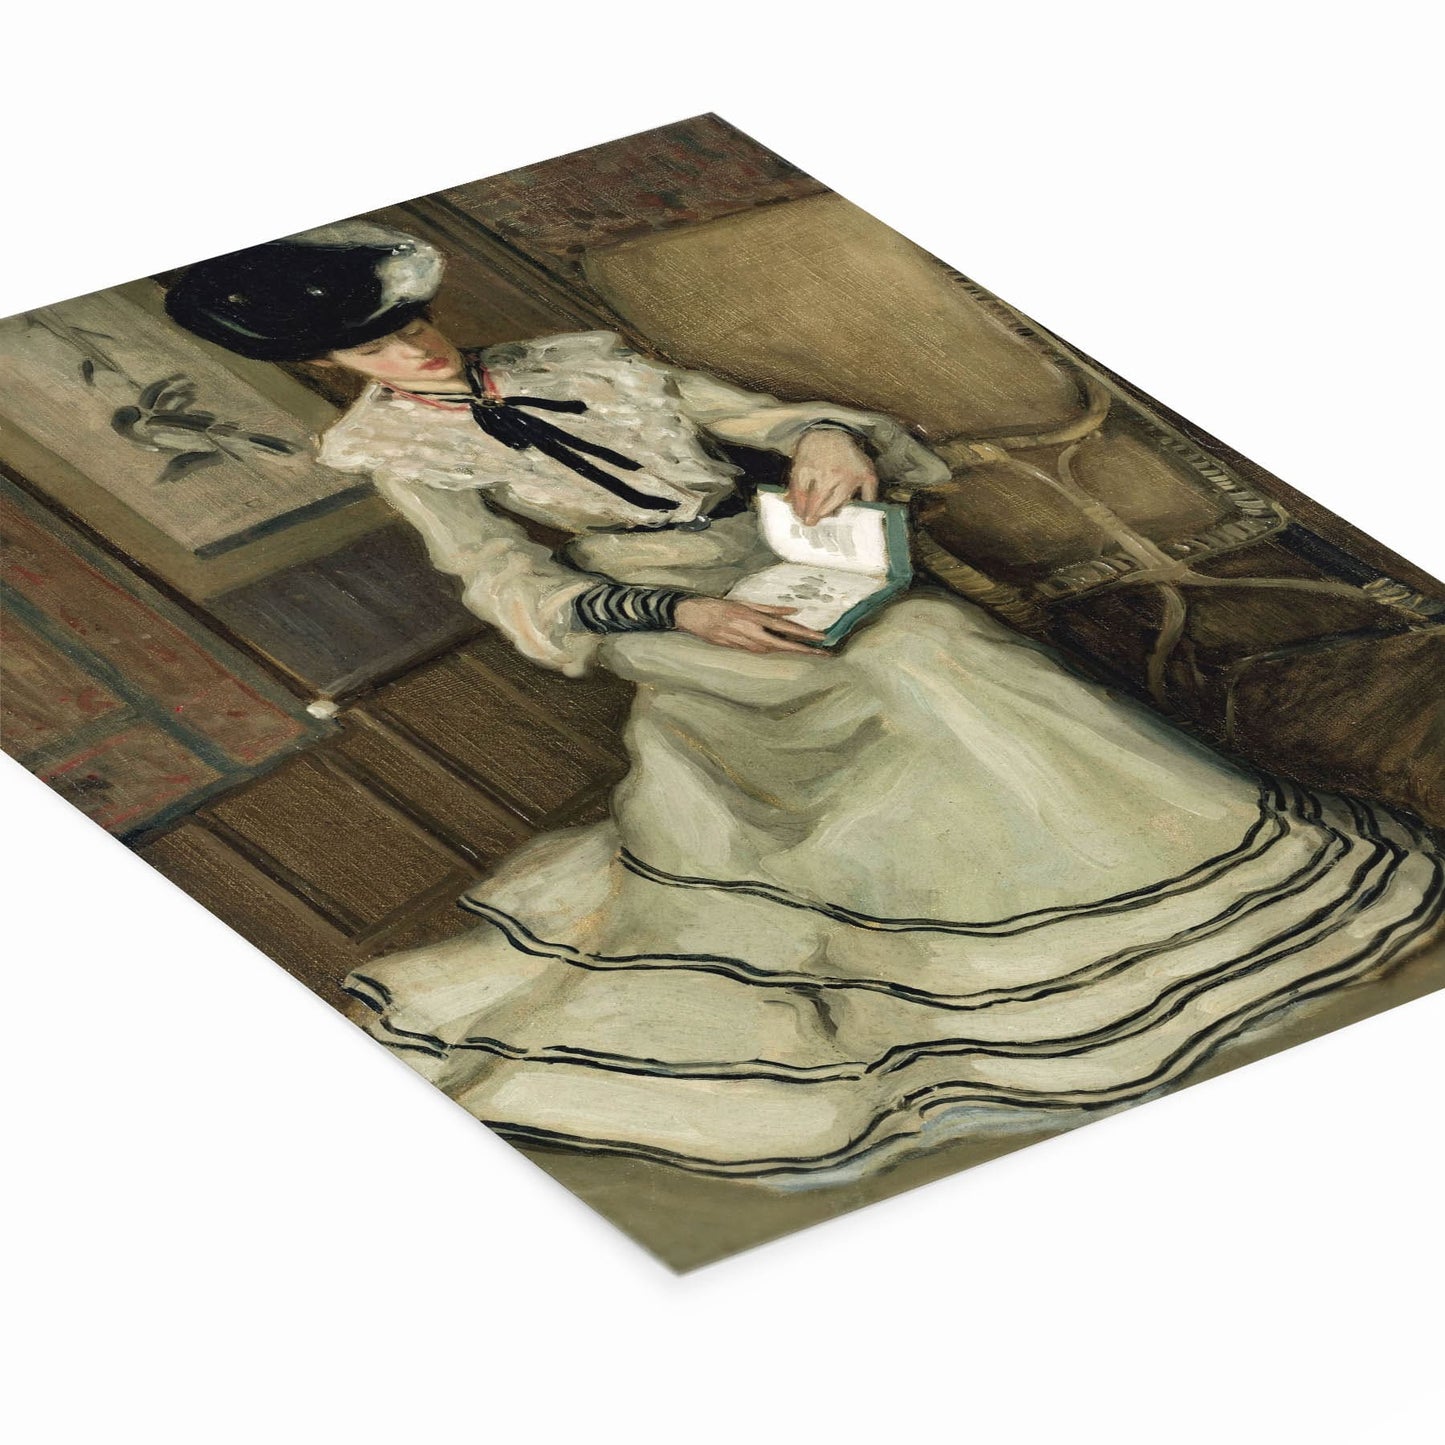 Elegant Woman Reading Painting Laying Flat on a White Background